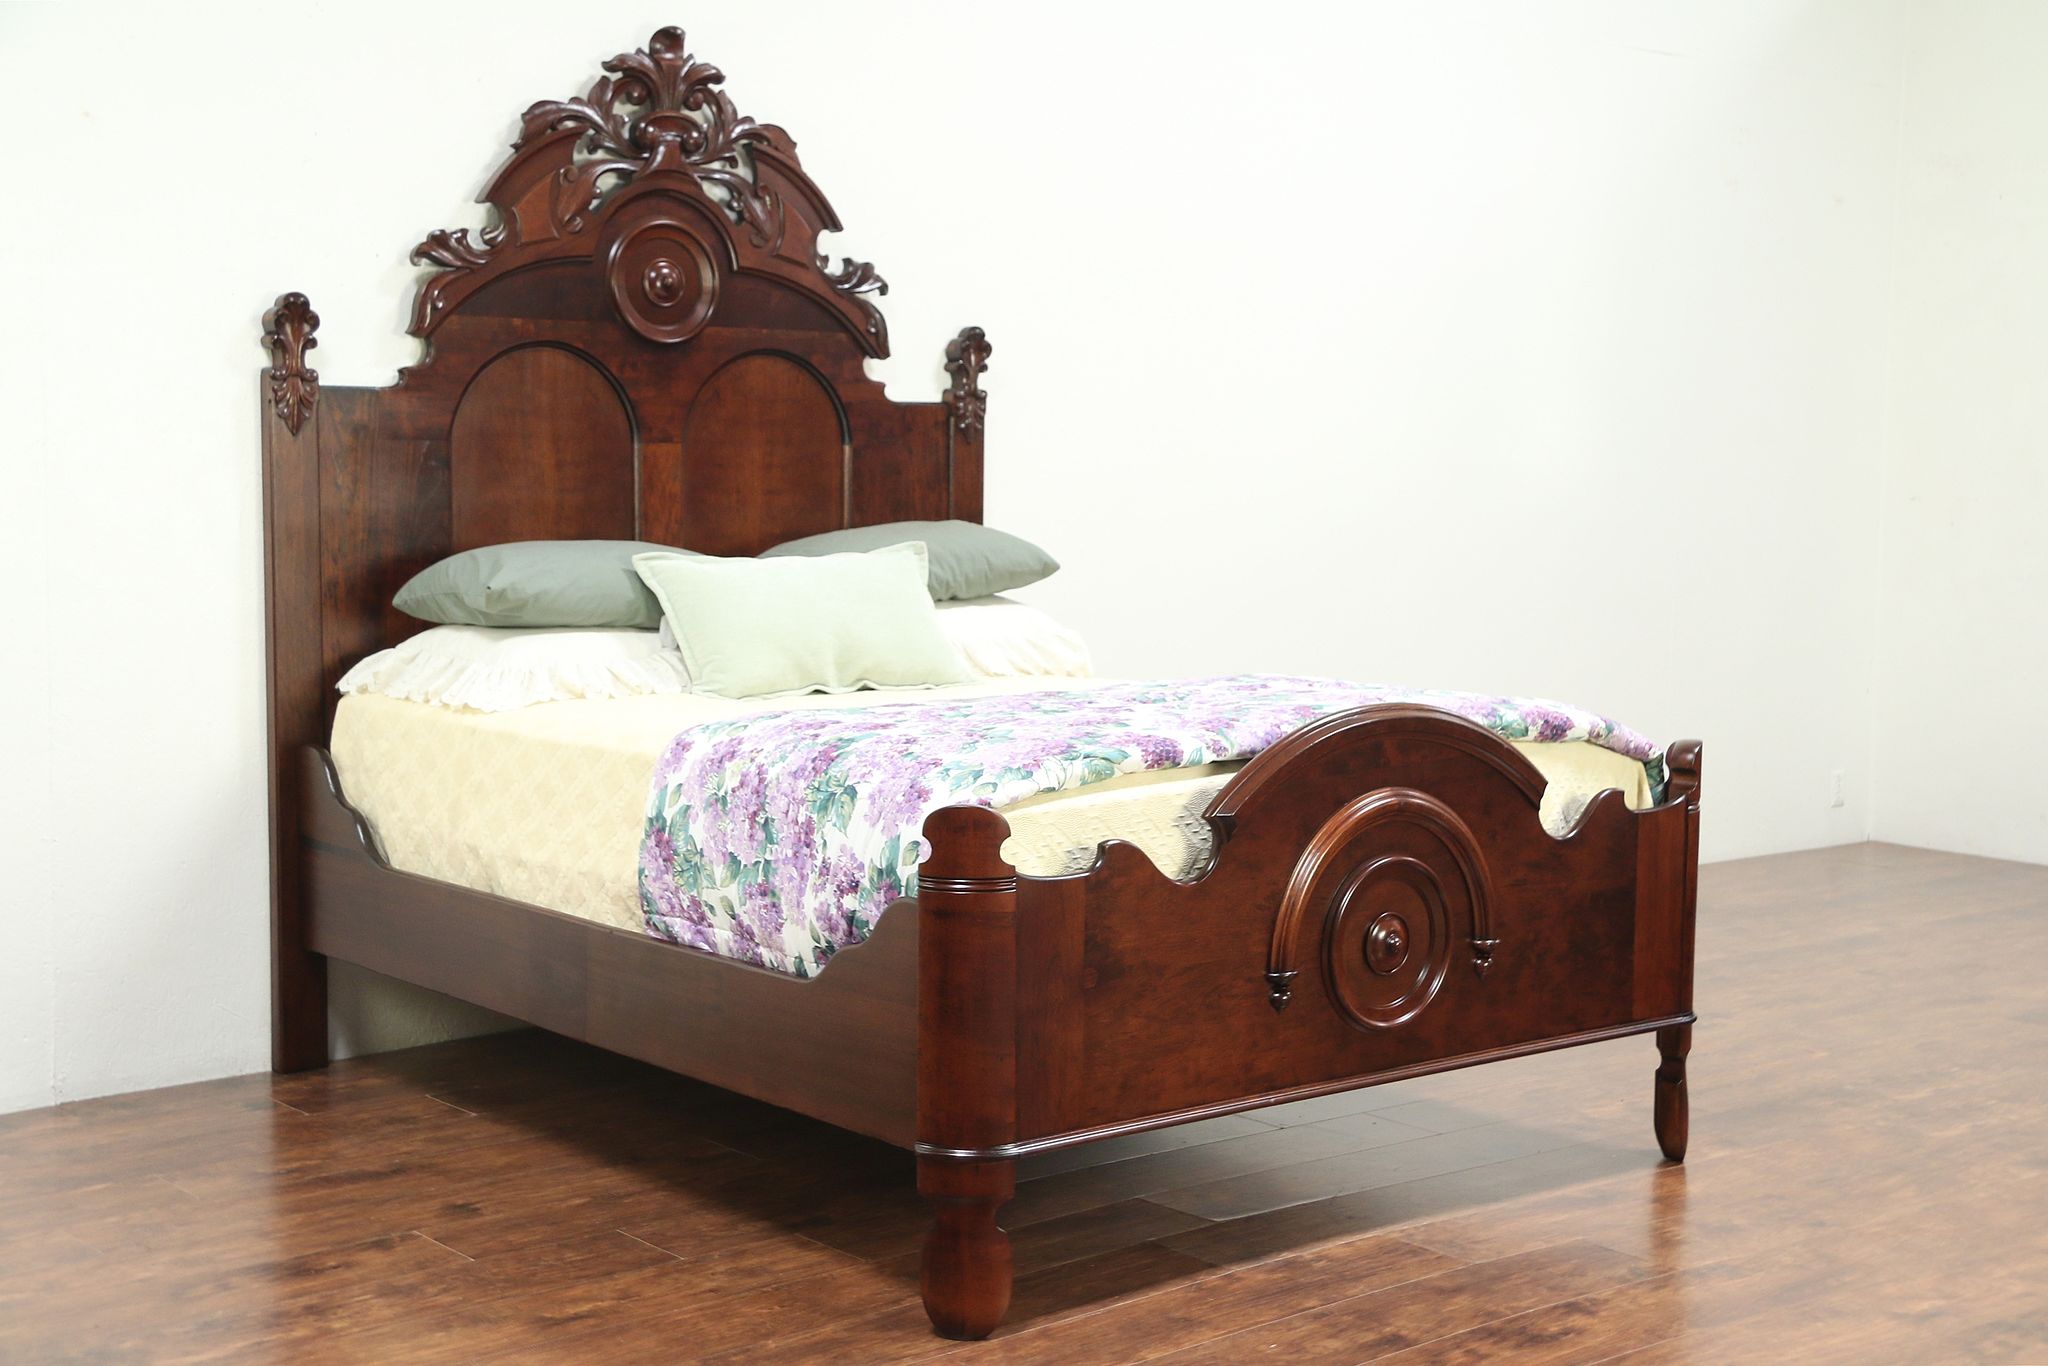 Victorian Antique 1860 S Carved Cherry, Ornate Queen Size Bed